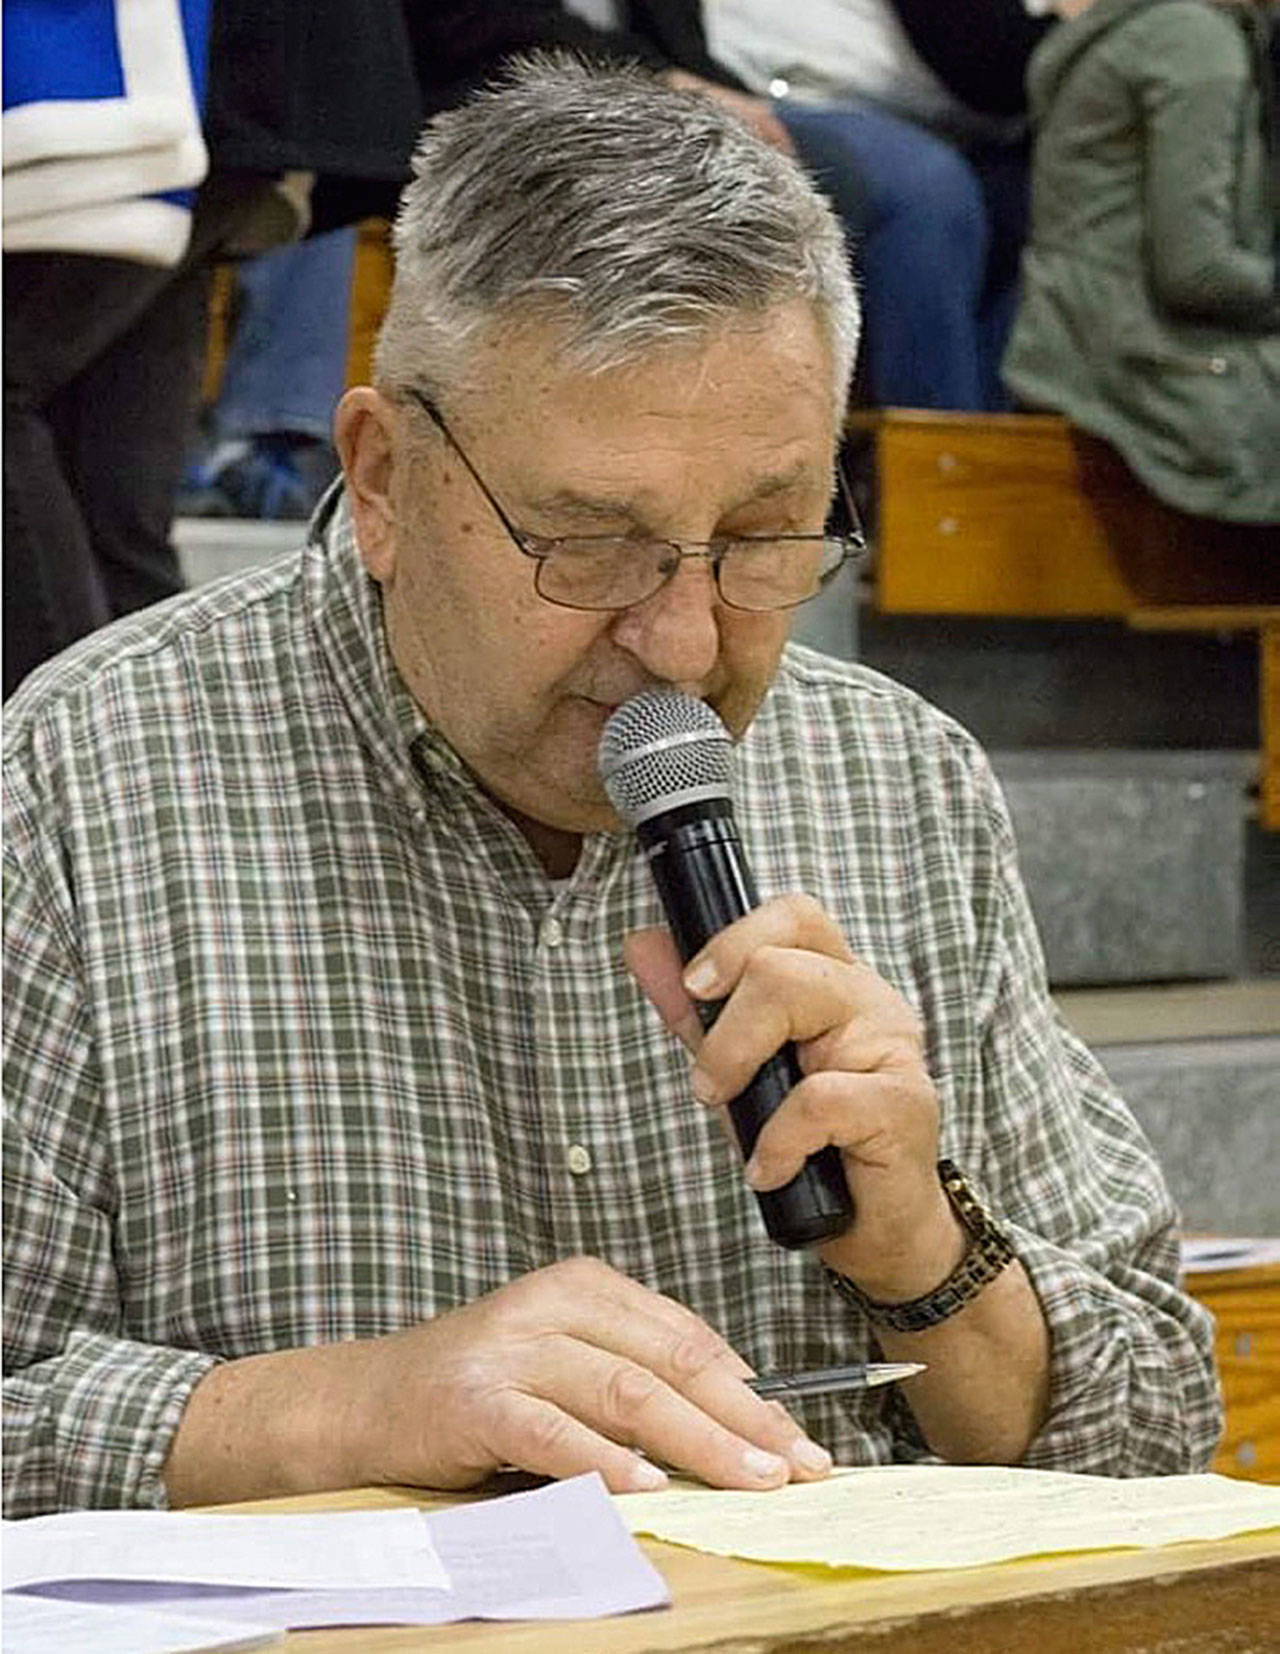 Known as the “Voice of the Eagles,” Elma High School public address announcer Jack Prince called Eagles football and basketball games for 55 years. Prince passed away on March 26. (Submitted photo)